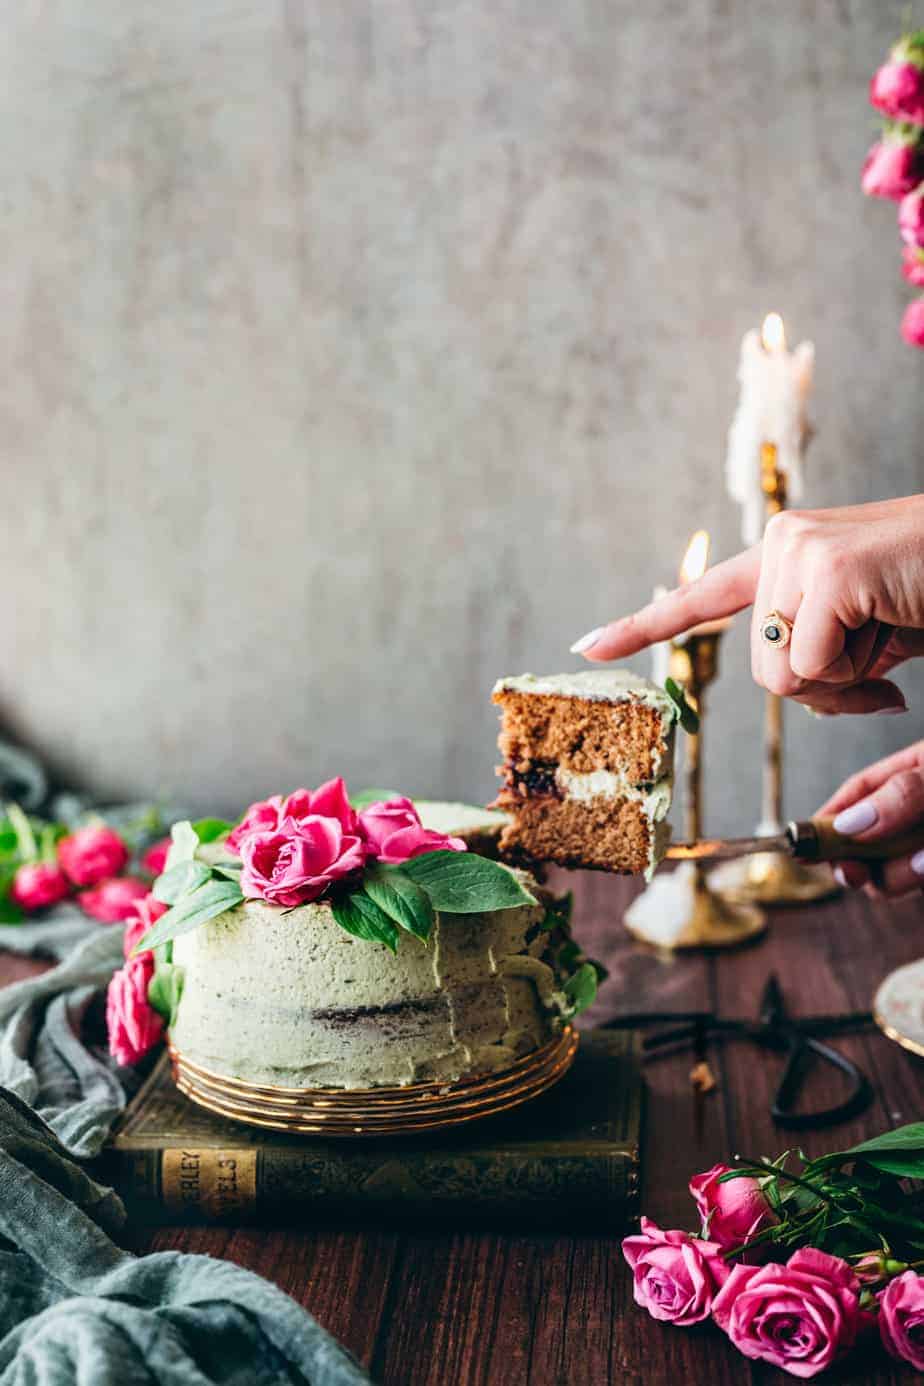 woman's hand serving a slice of mint basil cake